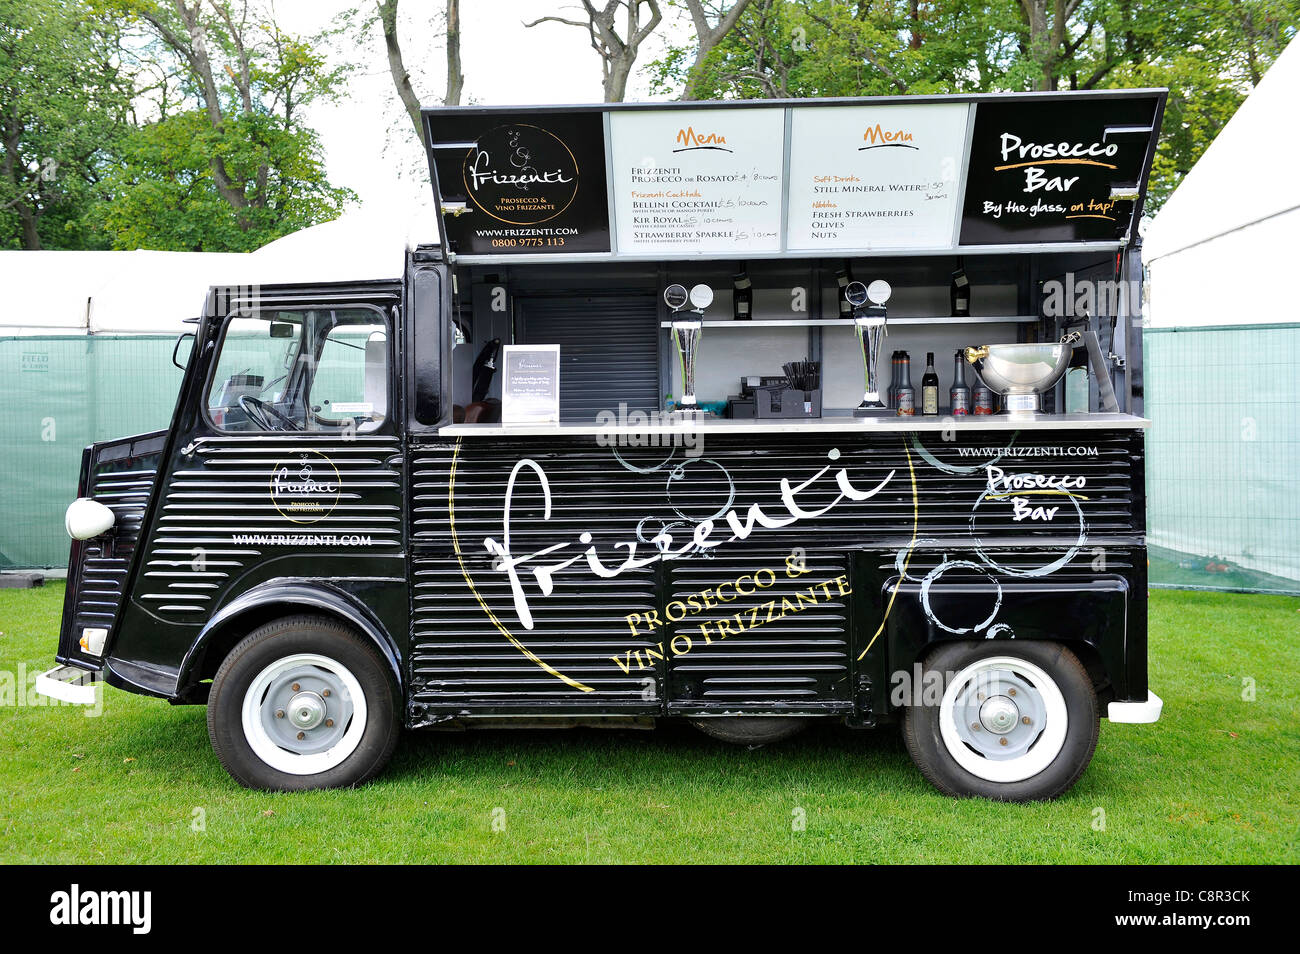 Vintage Citroen van that has been converted into a mobile Prosecco bar ...